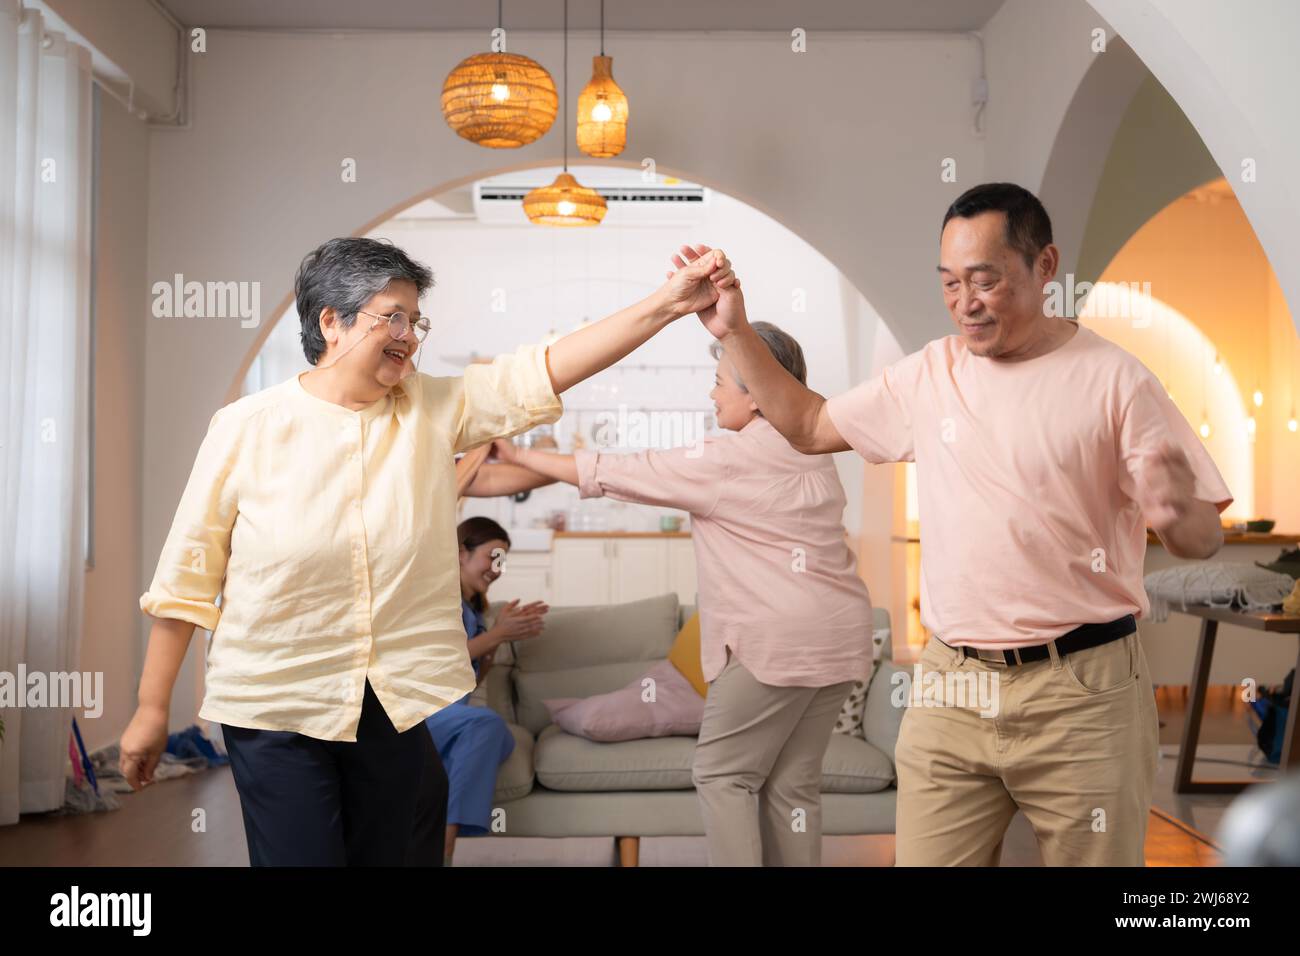 A group of elderly Asian people dance together happily, in the retirement home Stock Photo